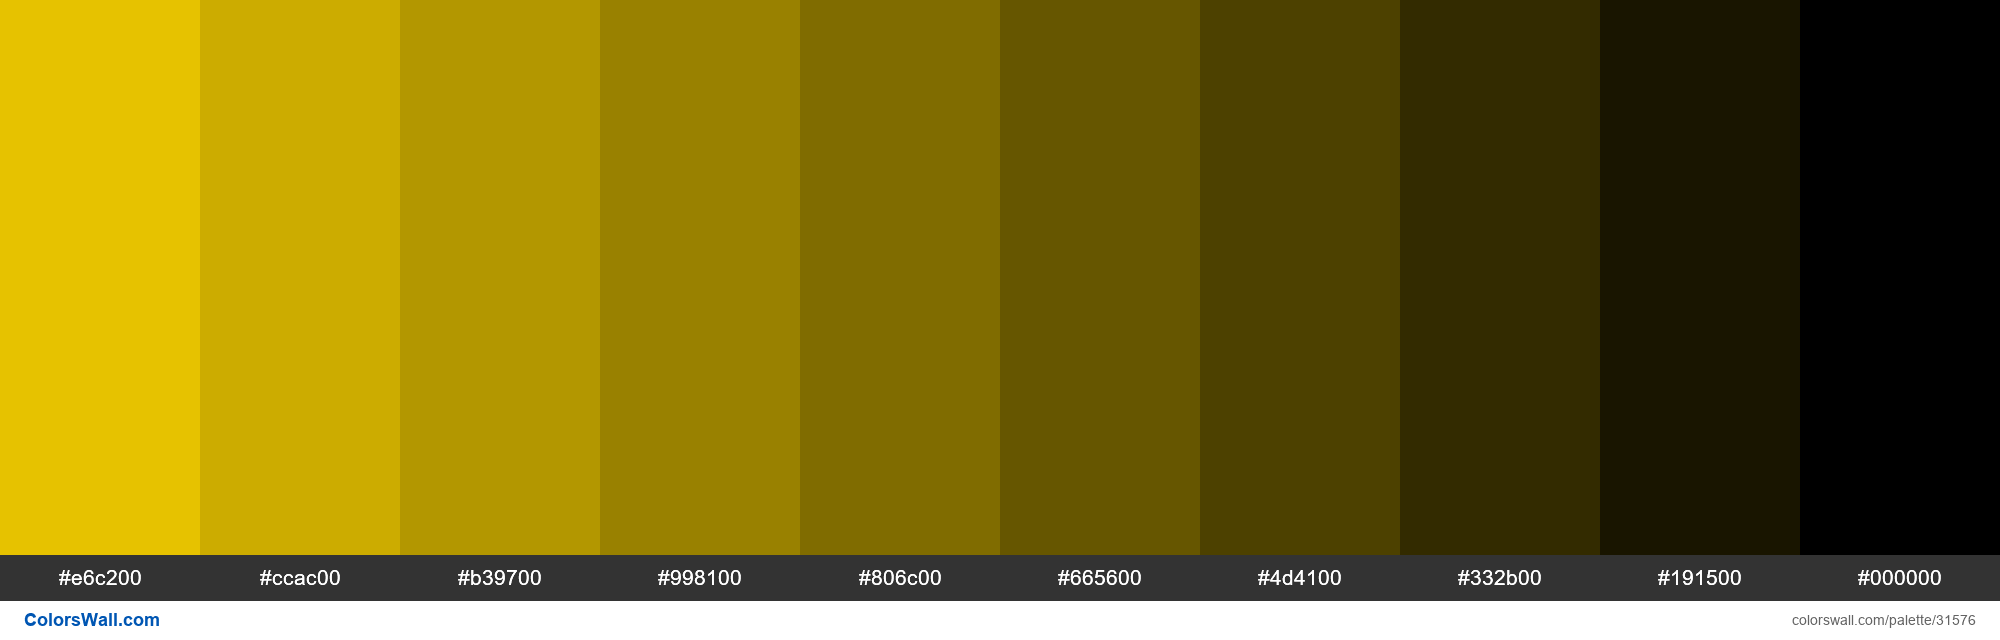 Shades X11 color Gold #FFD700 hex - ColorsWall